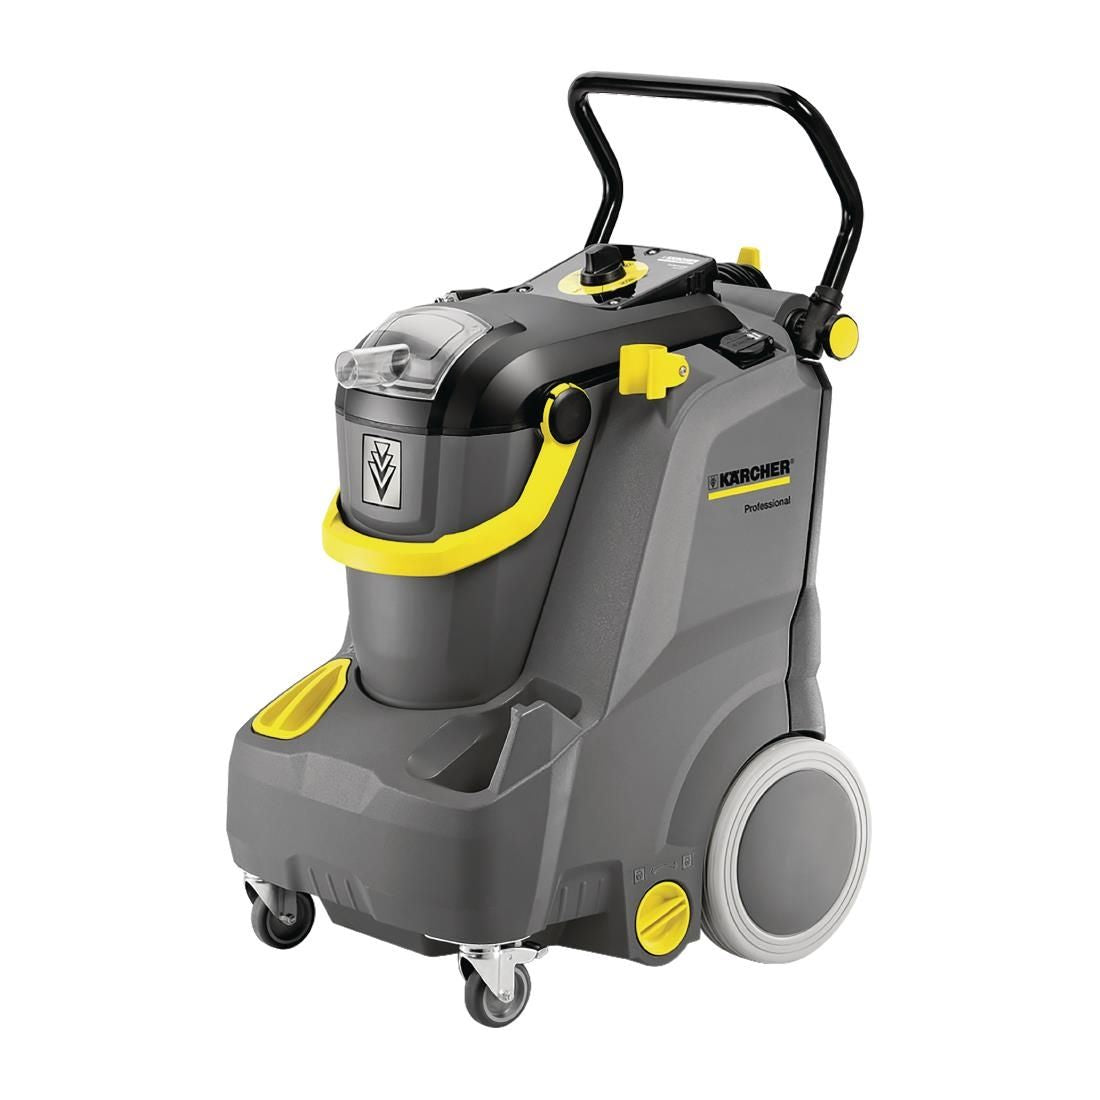 Karcher Puzzi 30/4 Spray Extraction Cleaner JD Catering Equipment Solutions Ltd